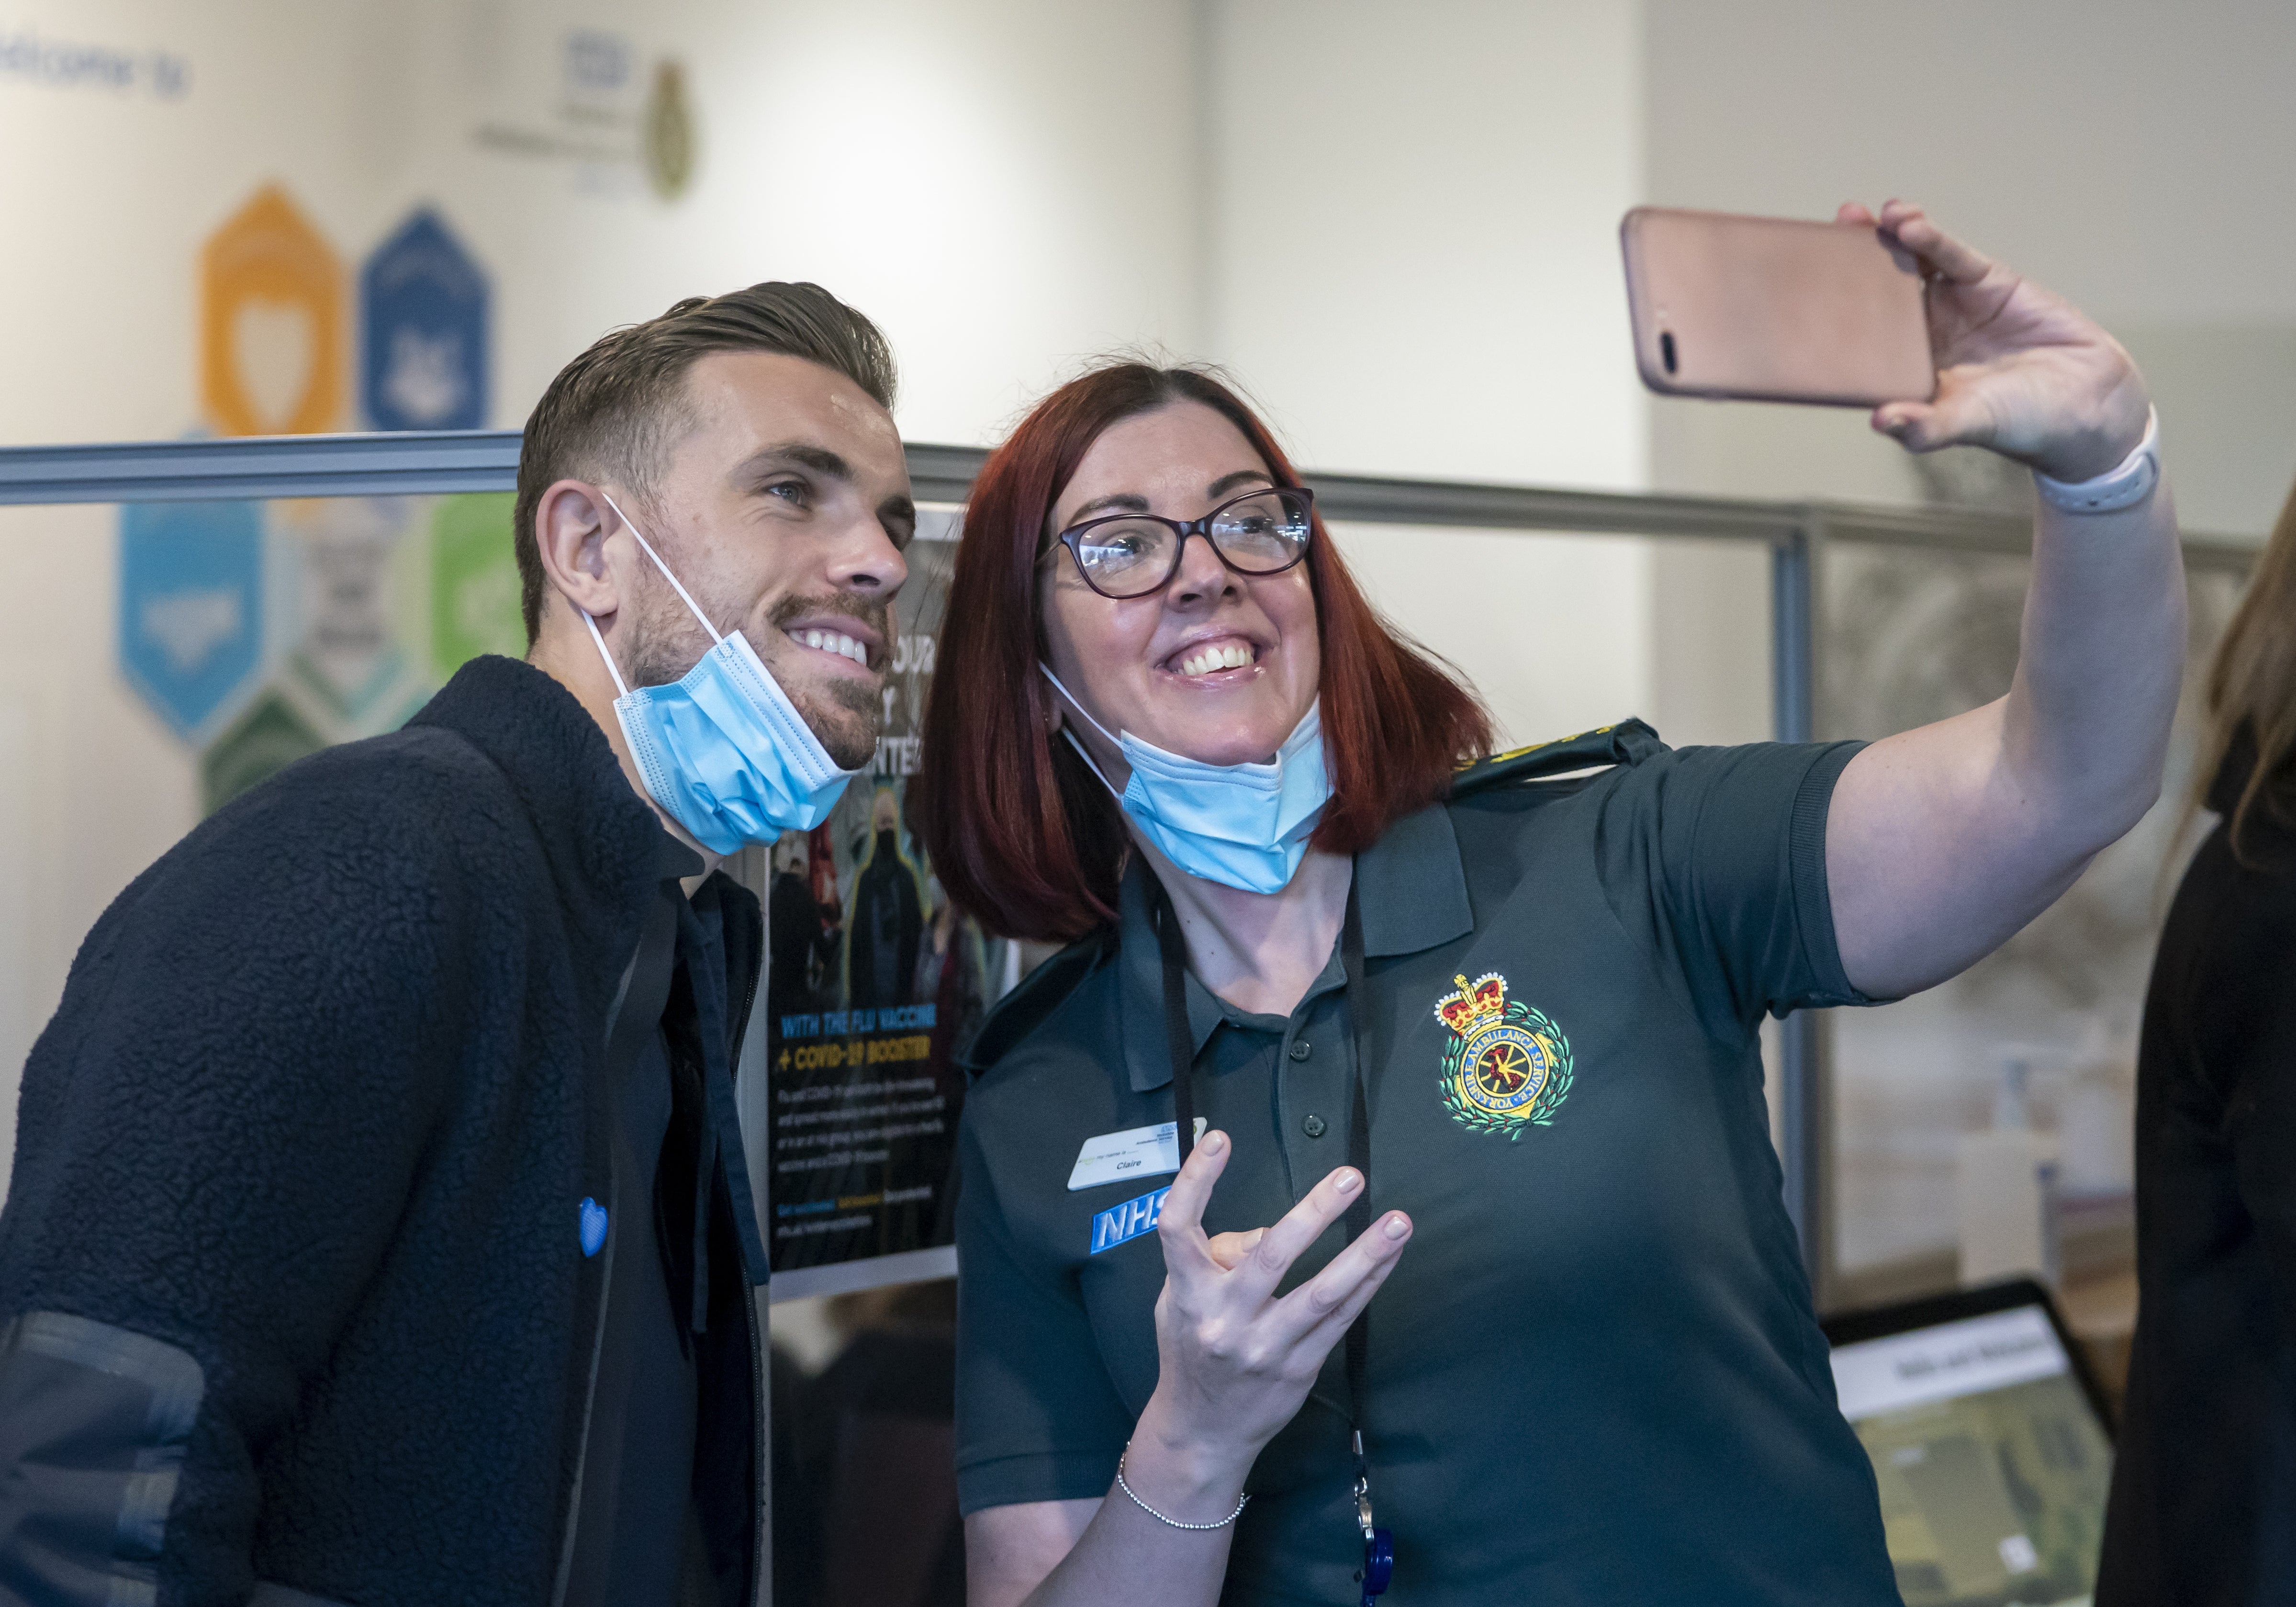 England star and Liverpool captain Jordan Henderson has a selfie taken with Head of Operations Claire Lindsay during a visit to the Yorkshire Ambulance Service in Wakefield (Danny Lawson/PA)